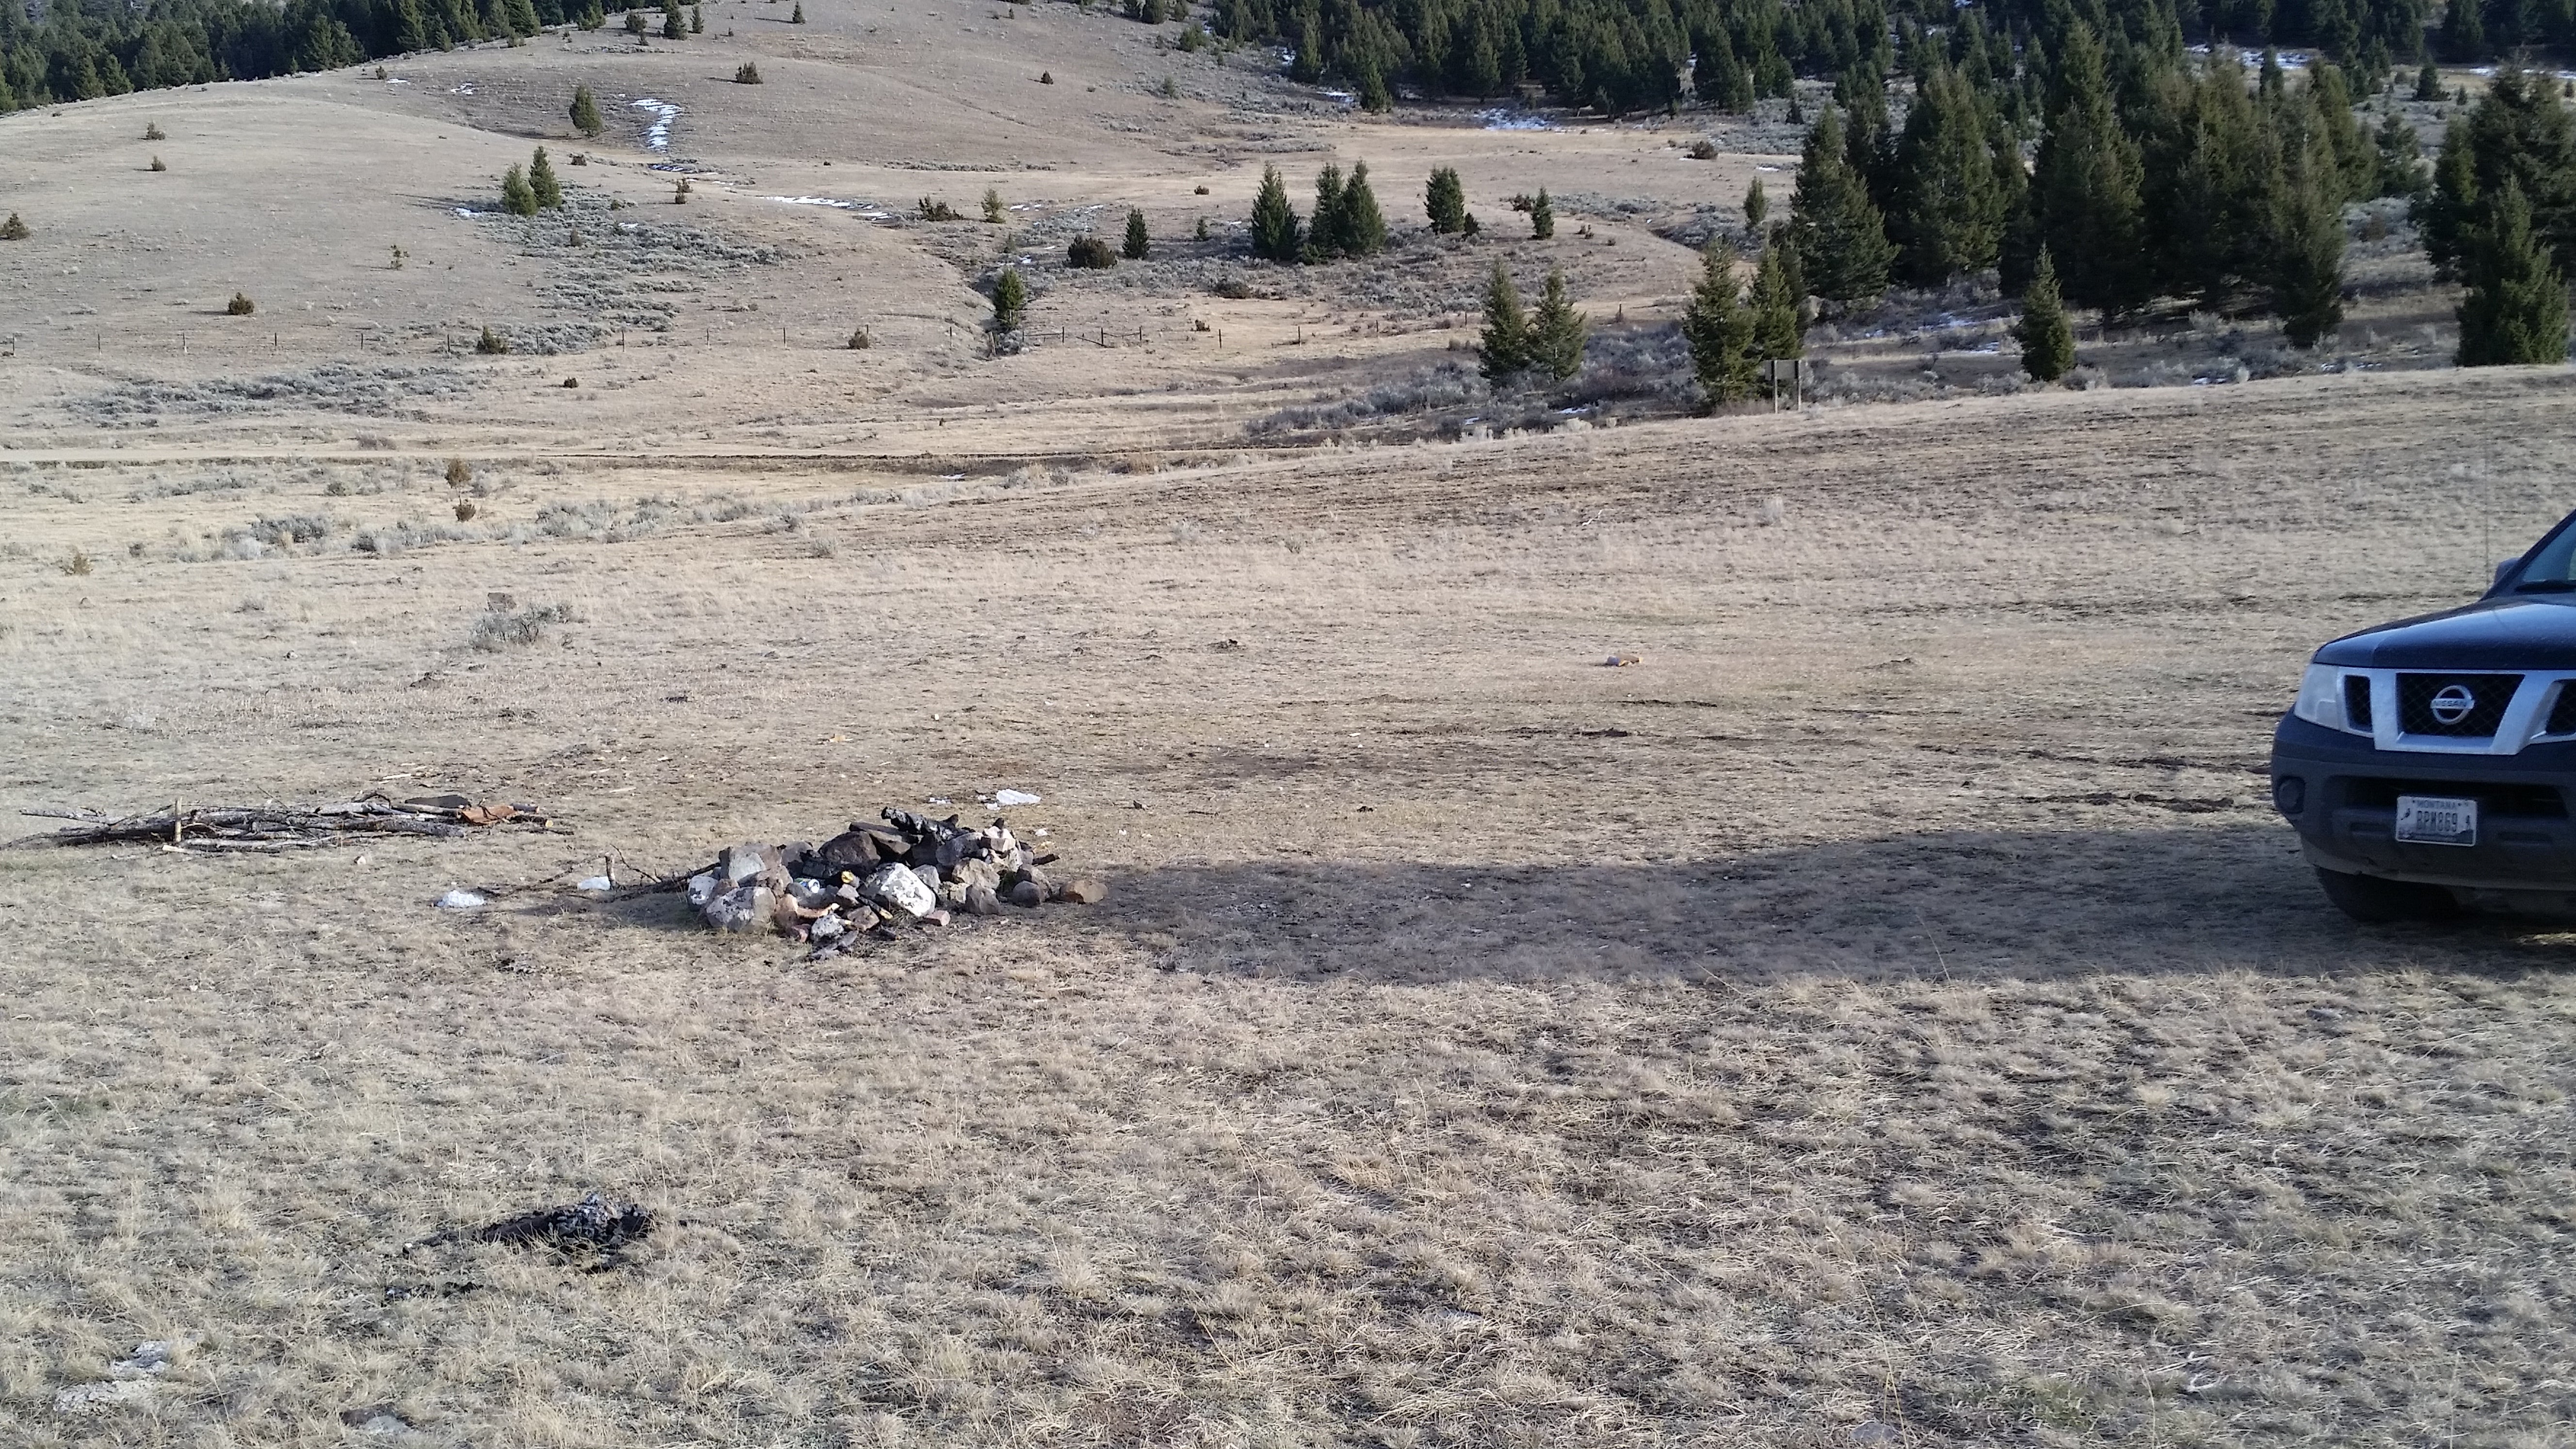 Camper submitted image from Cow Creek Dispersed Camping Area - 3